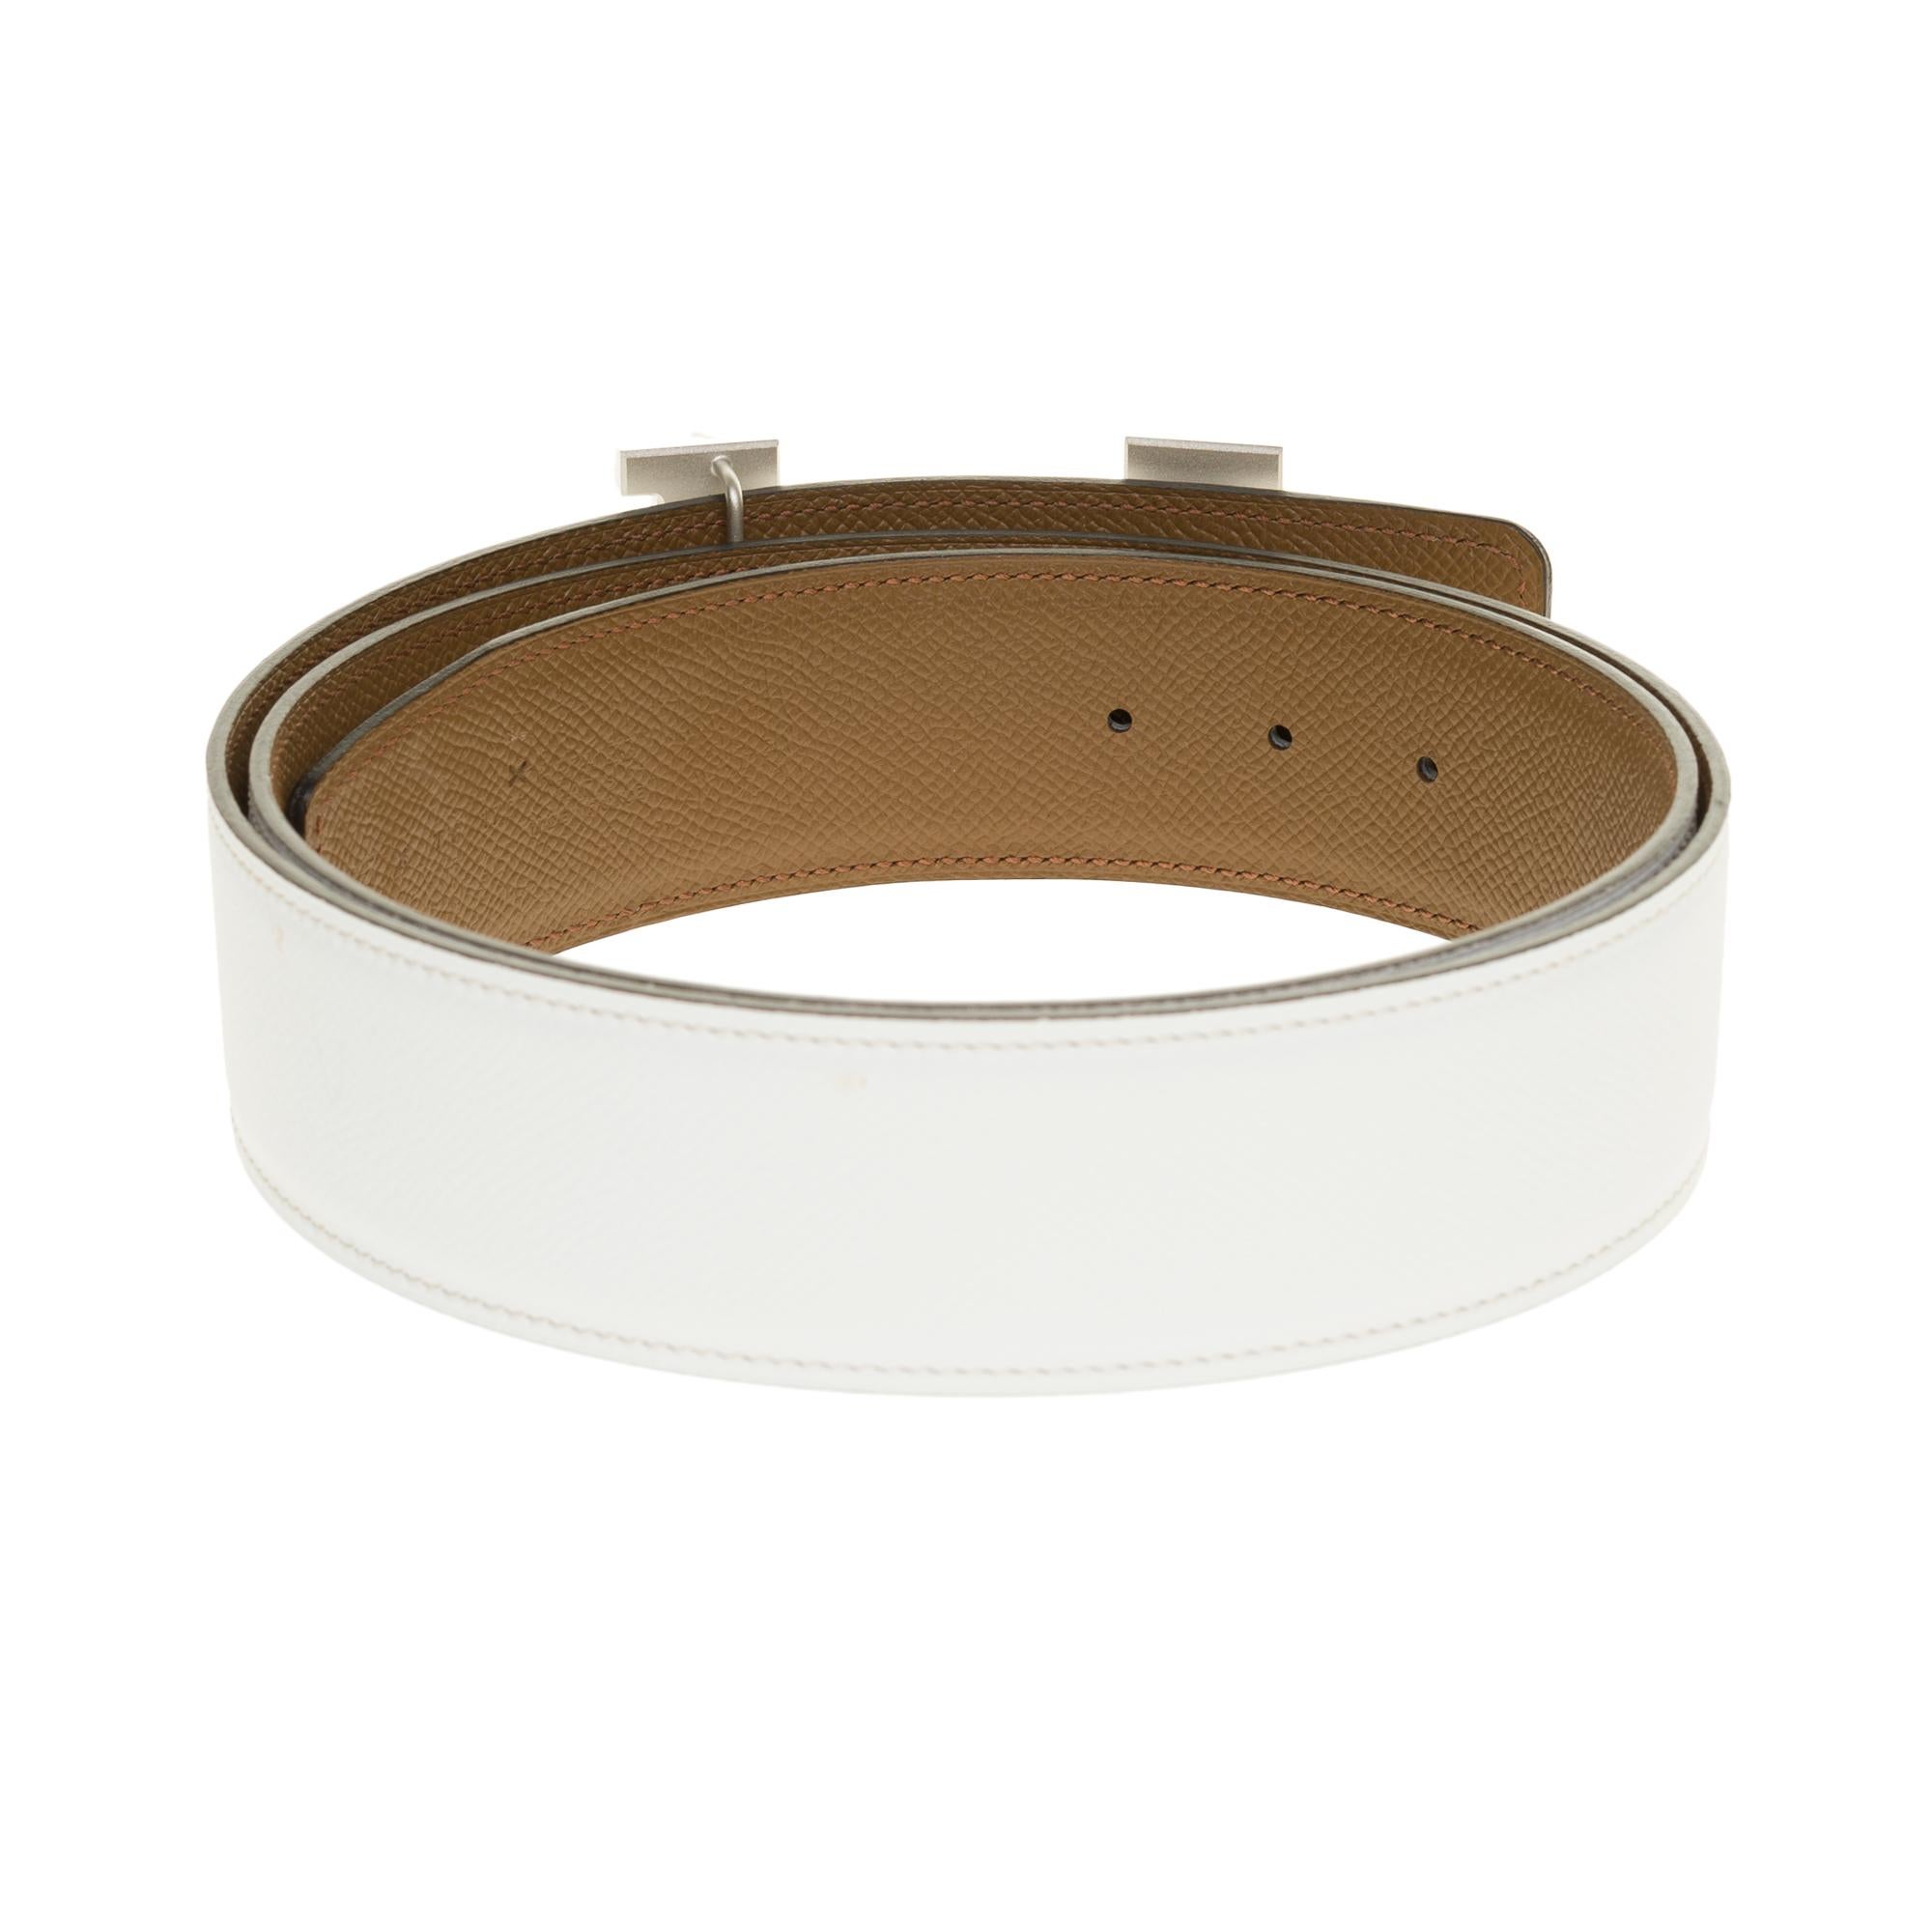 Beautiful Hermes Reversible wide belt in white epsom leather/ Epsom taupe.
Large buckle (8,5) in new brushed silver metal (with plastic).
Size: 95.
Signature: Hermès Paris, Made in France.
Stamp X (private sales).
Dimensions: 4 cm * 95 cm.

Brand